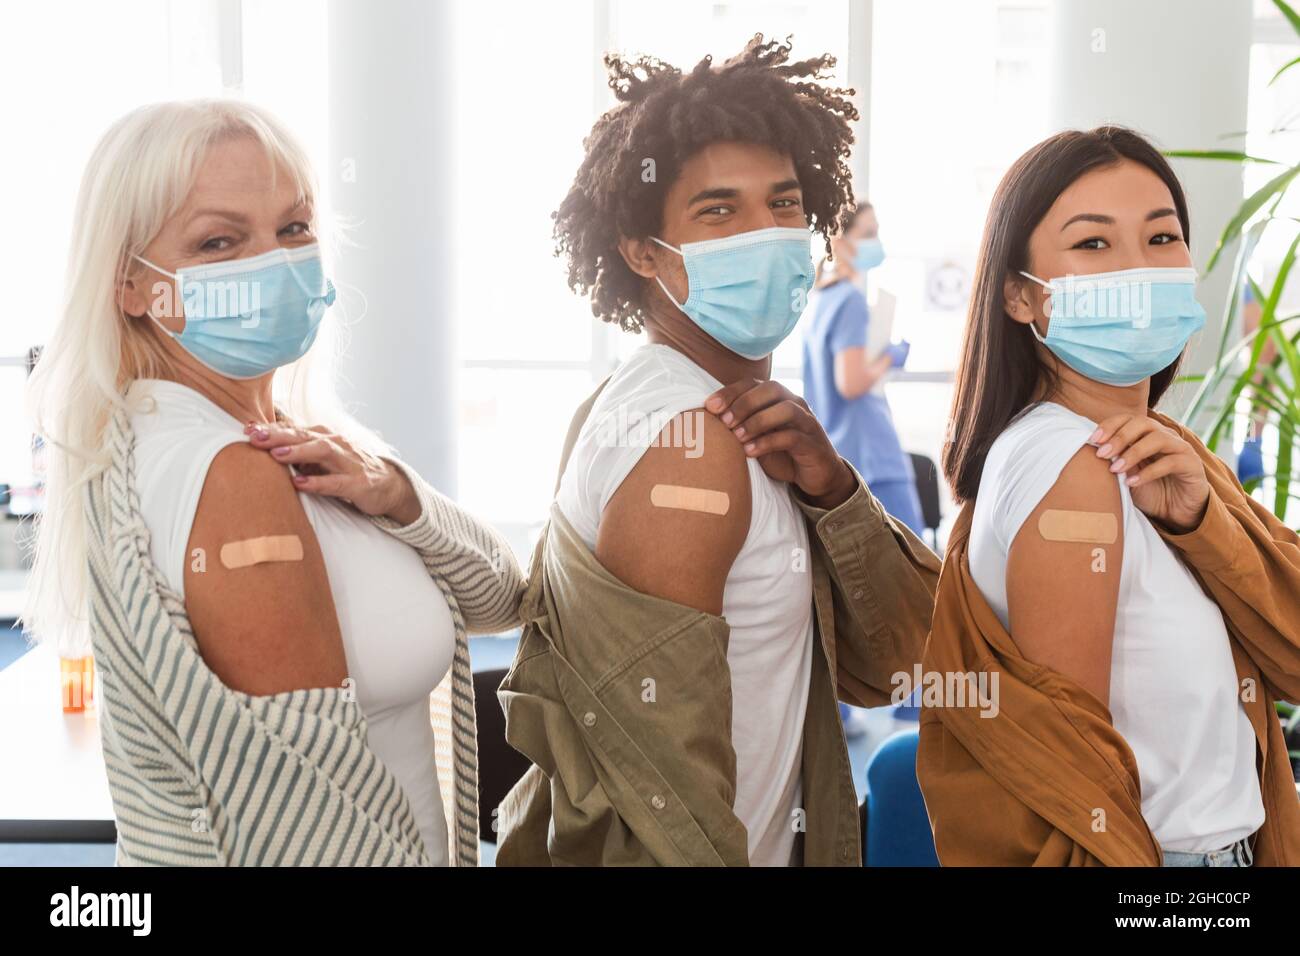 Diverse Group Showing Vaccinated Arm With Adhesive Bandage In Clinic Stock Photo